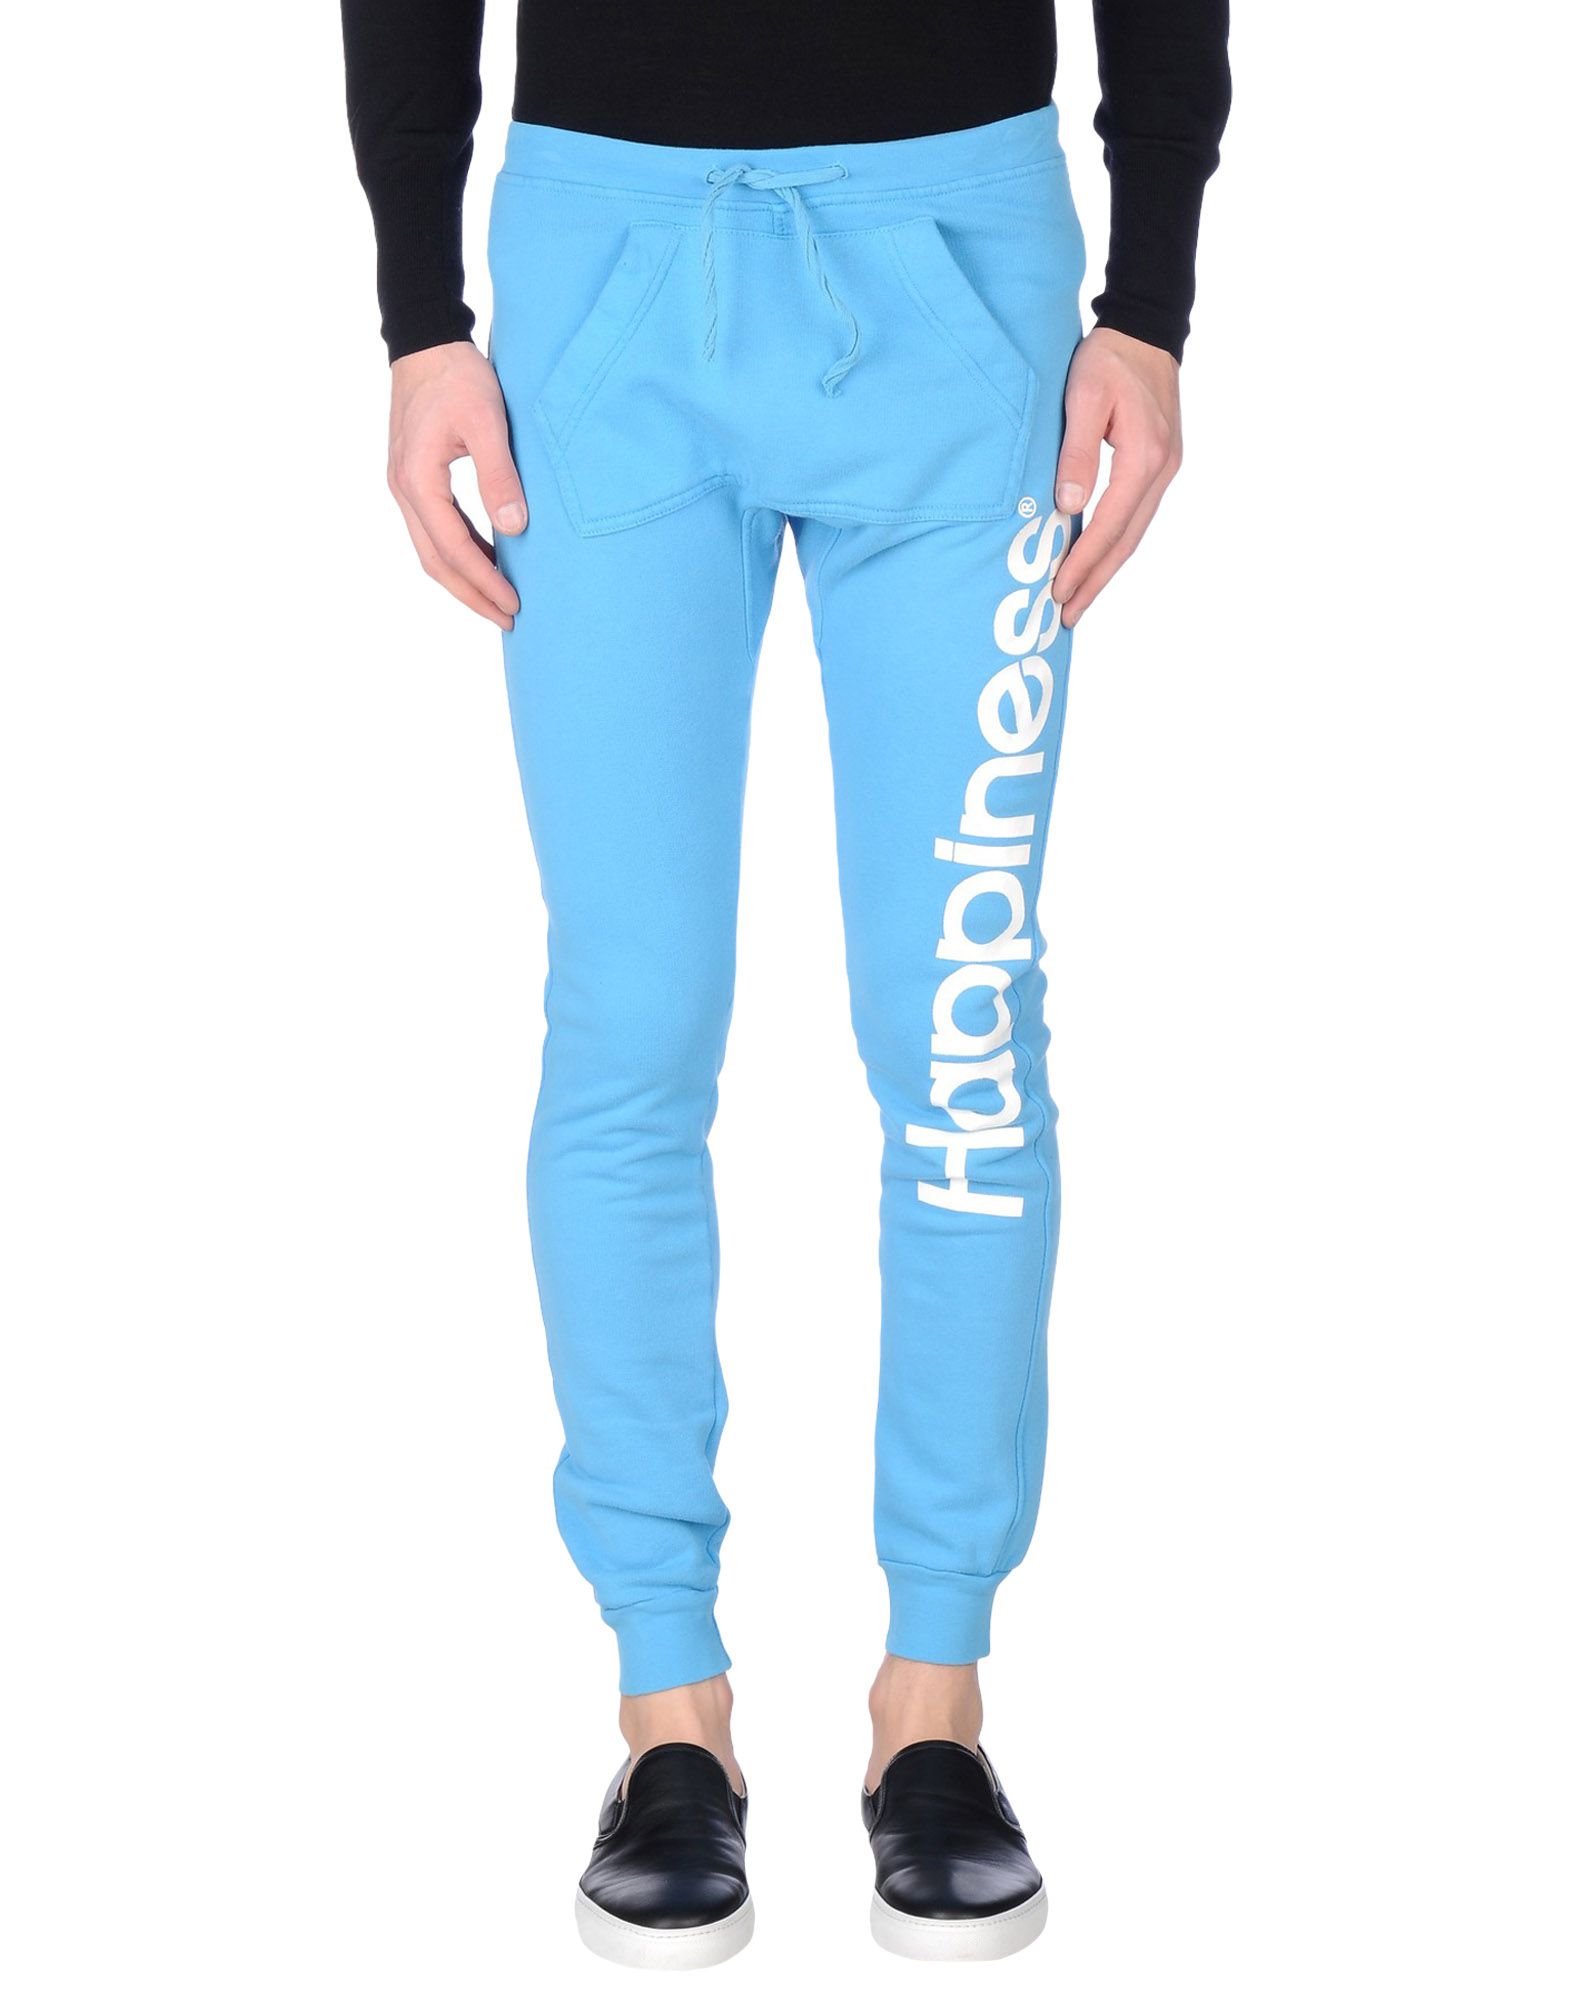 Happiness Pants In Azure